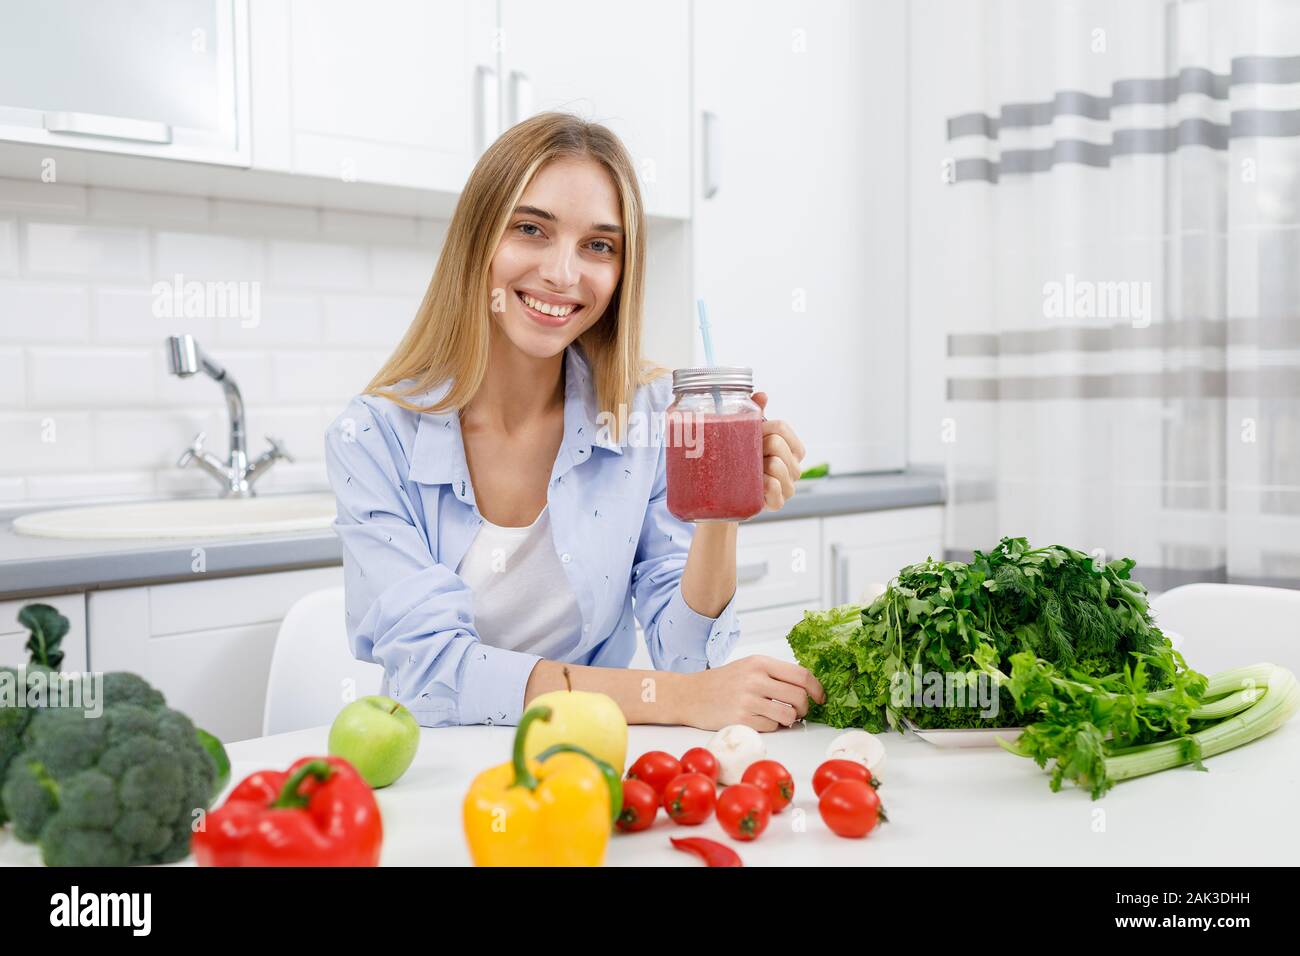 A Beautiful Blonde's Healthy A Green Lifestyle Stock Photo